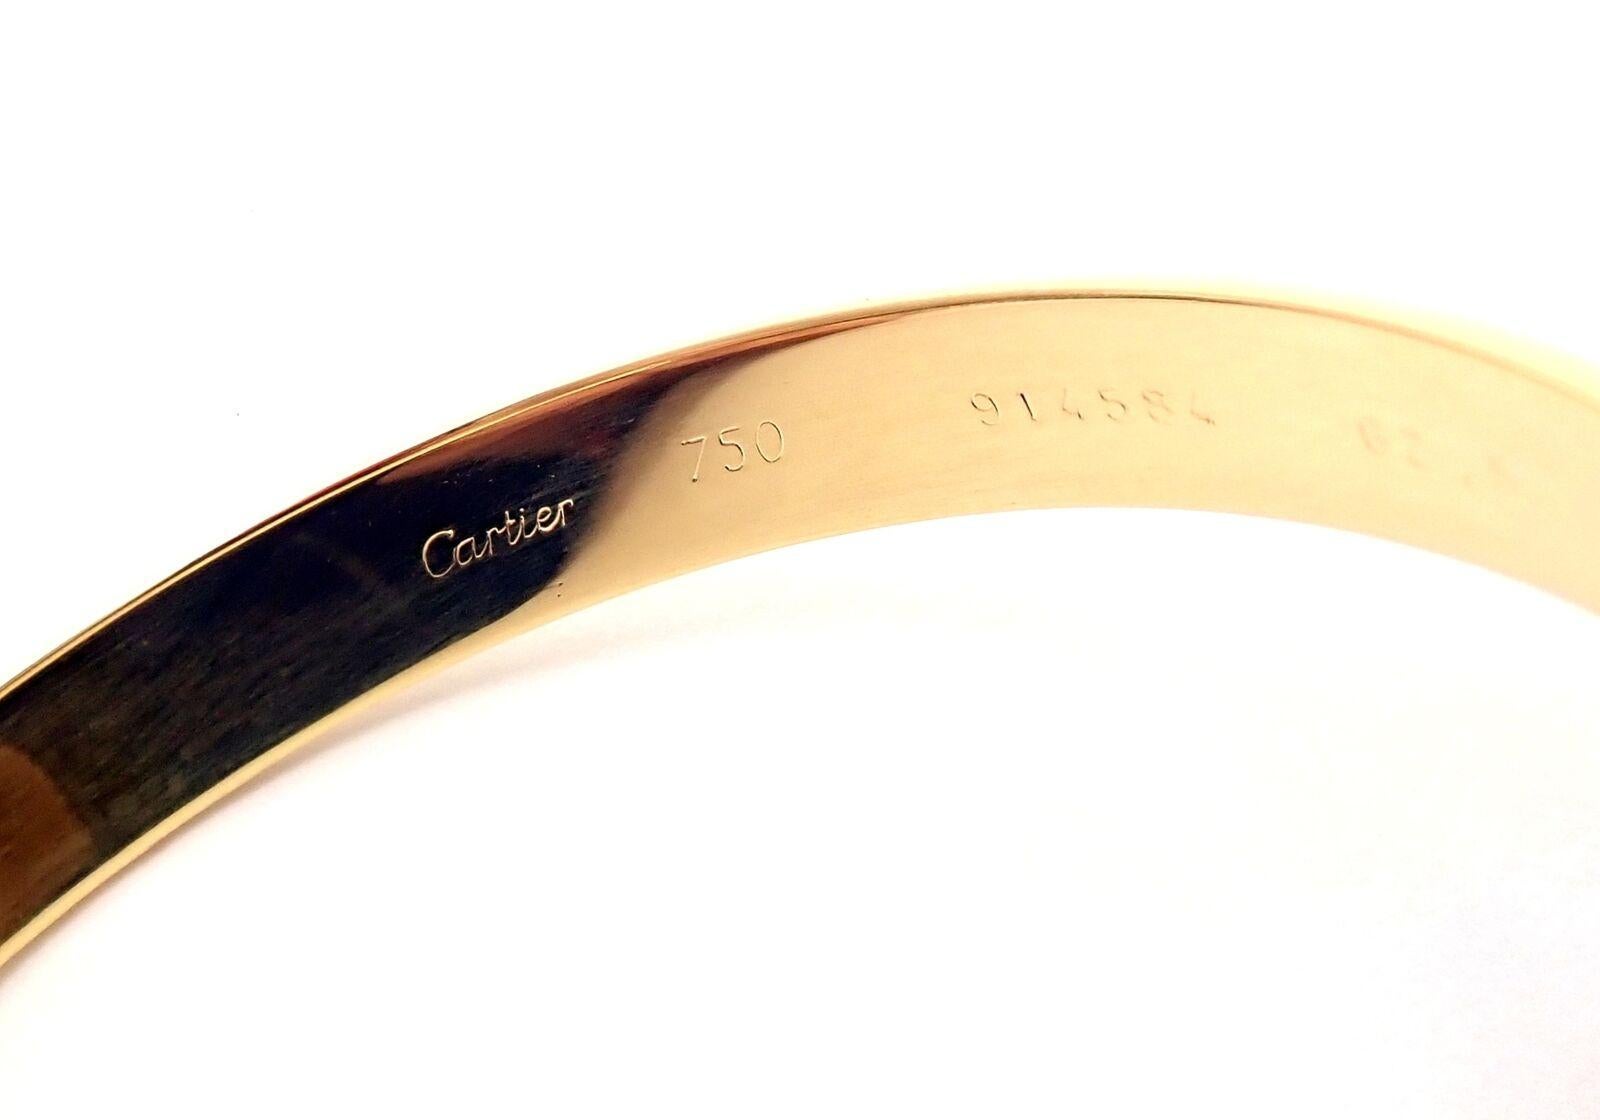 Cartier Trinity Slip-On Tricolor Gold Bangle Bracelet In Excellent Condition For Sale In Holland, PA